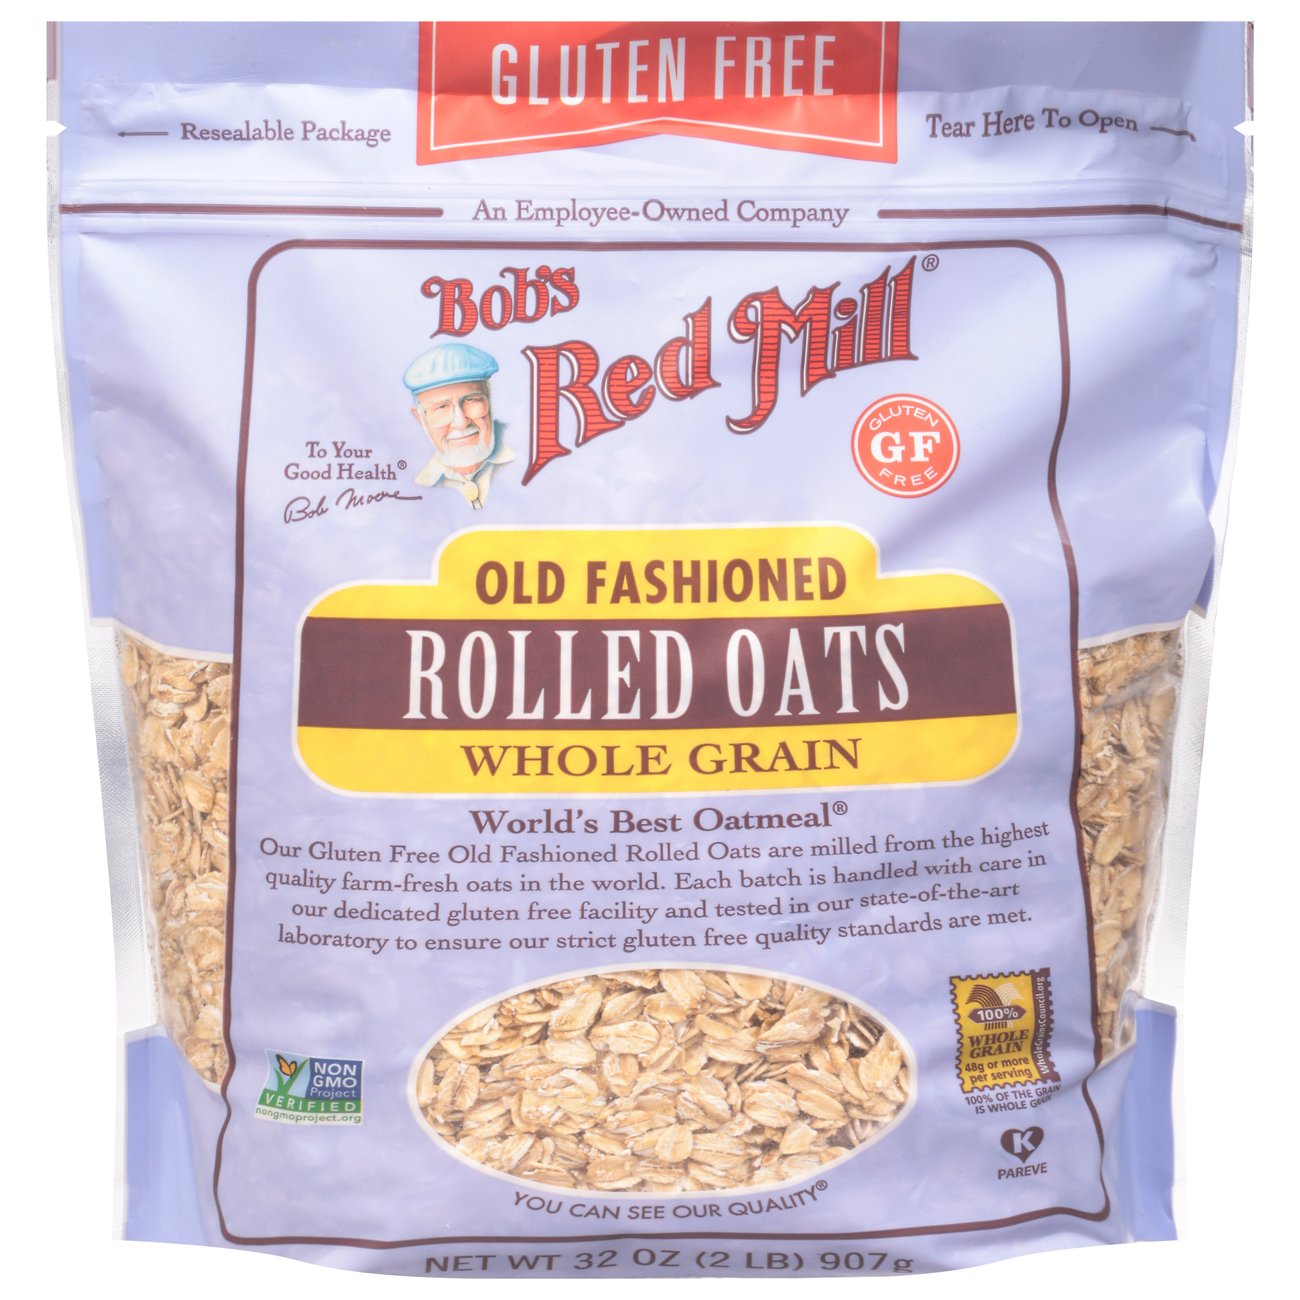 Bob's Red Mill Gluten Free Rolled Oats - Shop Oatmeal Hot Cereal at H-E-B